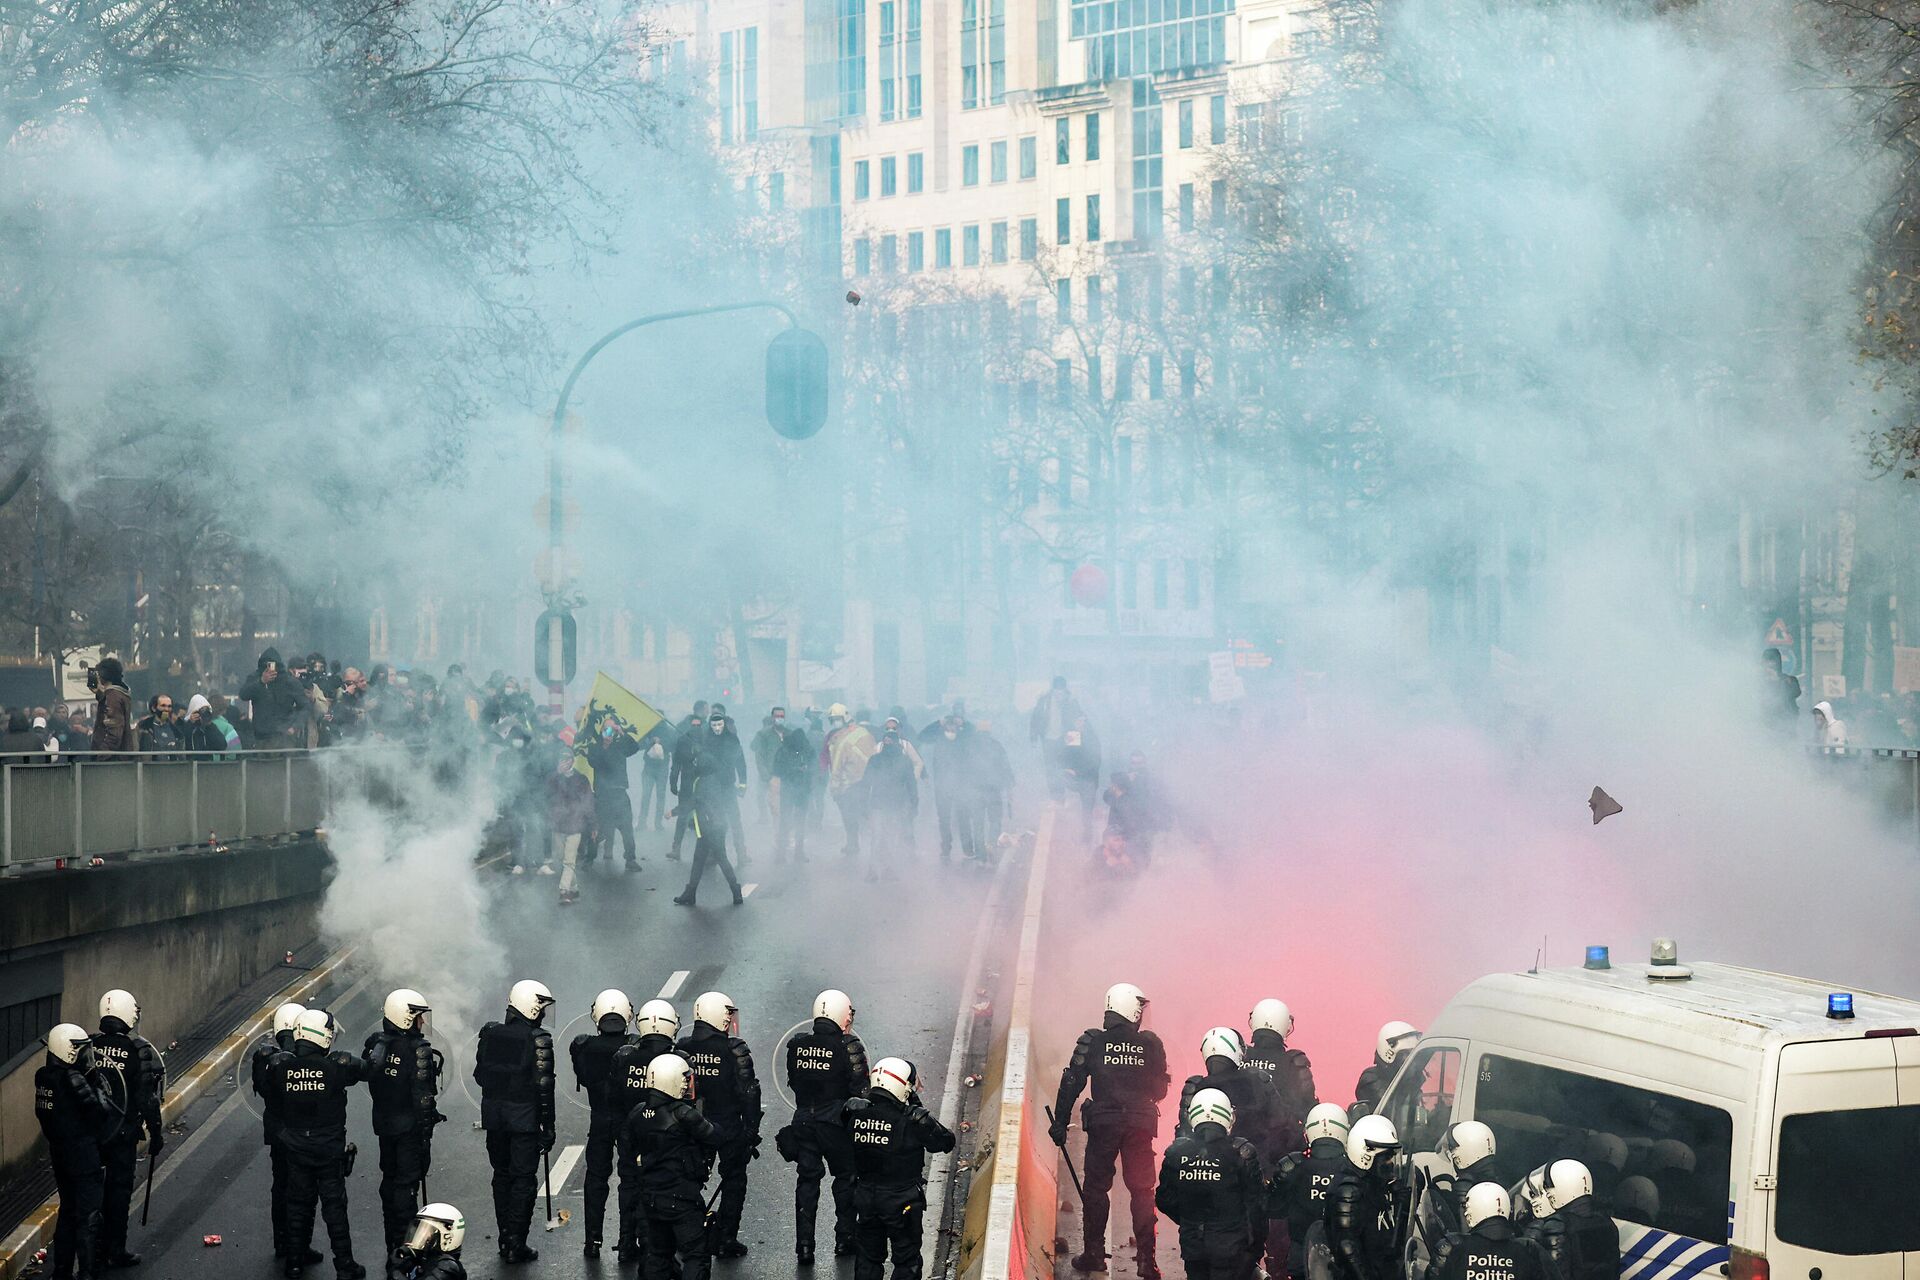 Protesters face riot police as they take part in a demonstration against Covid-19 measures, including the country's health pass, in Brussels on November 21, 2021. (Photo by Kenzo Tribouillard / AFP) - Sputnik International, 1920, 31.12.2021